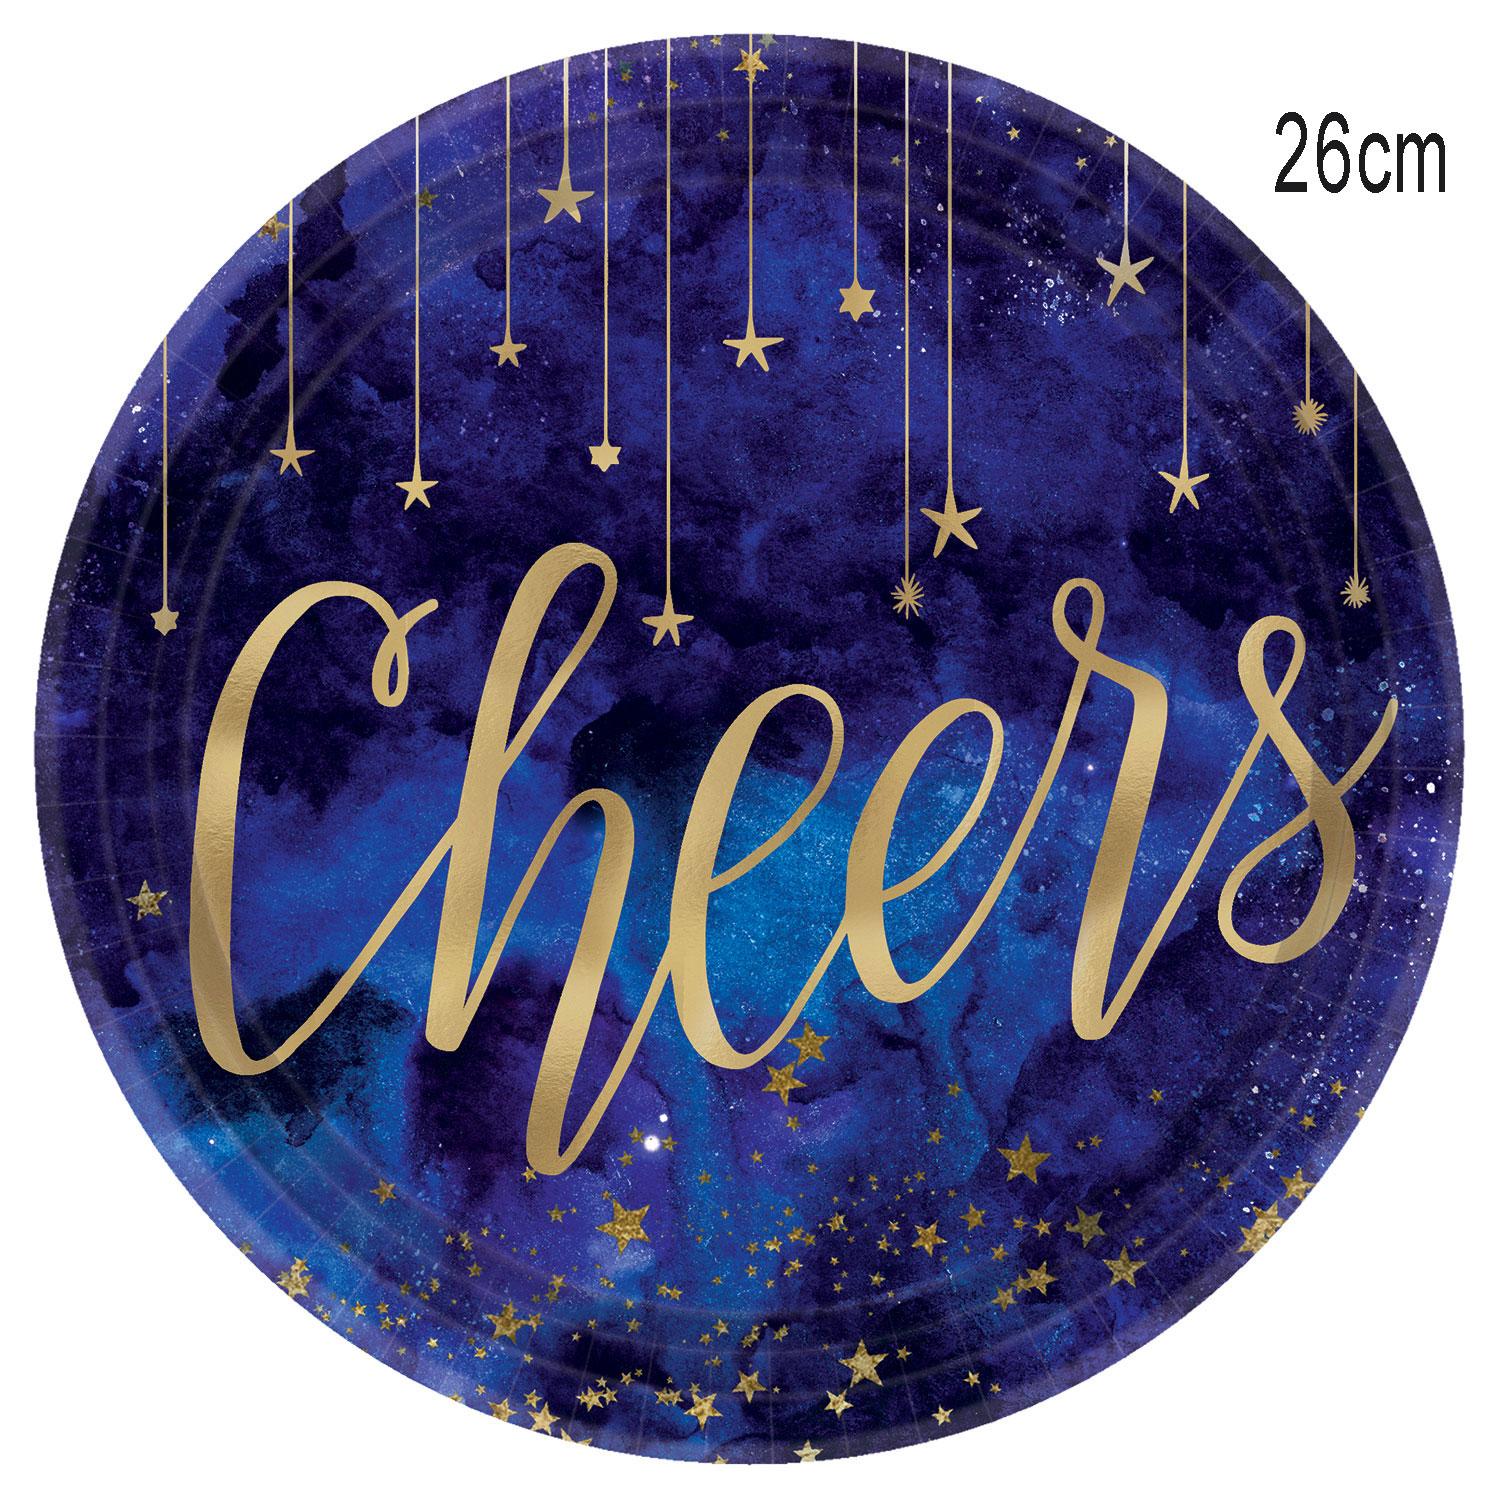 Midnight NYE Metallic Paper Plates 27cm - pk8 by Amscan 592207 available here at Karnival Costumes online party shop